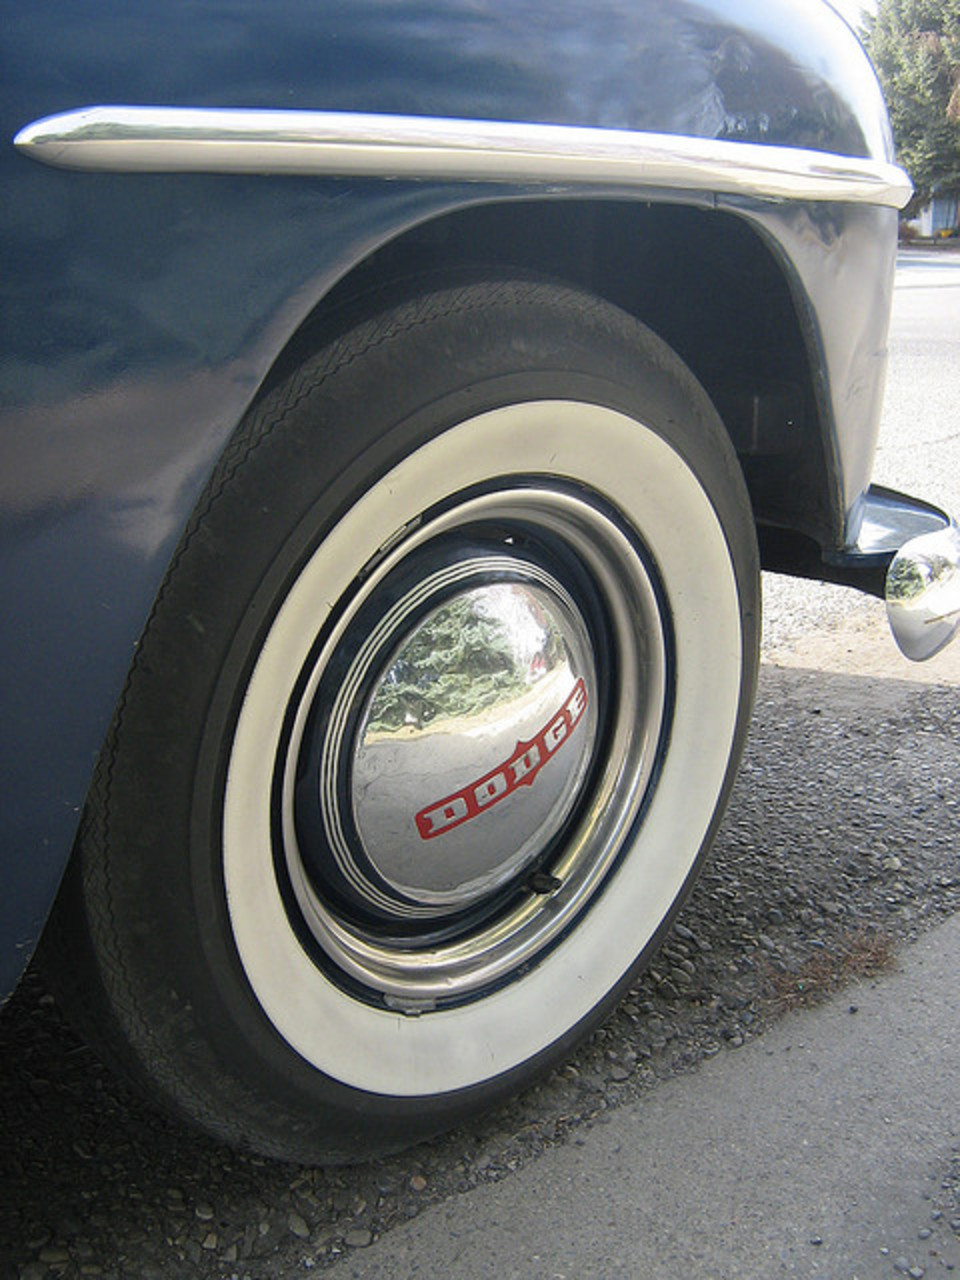 This one is a Dodge D25, which would be an early 1949 that uses the